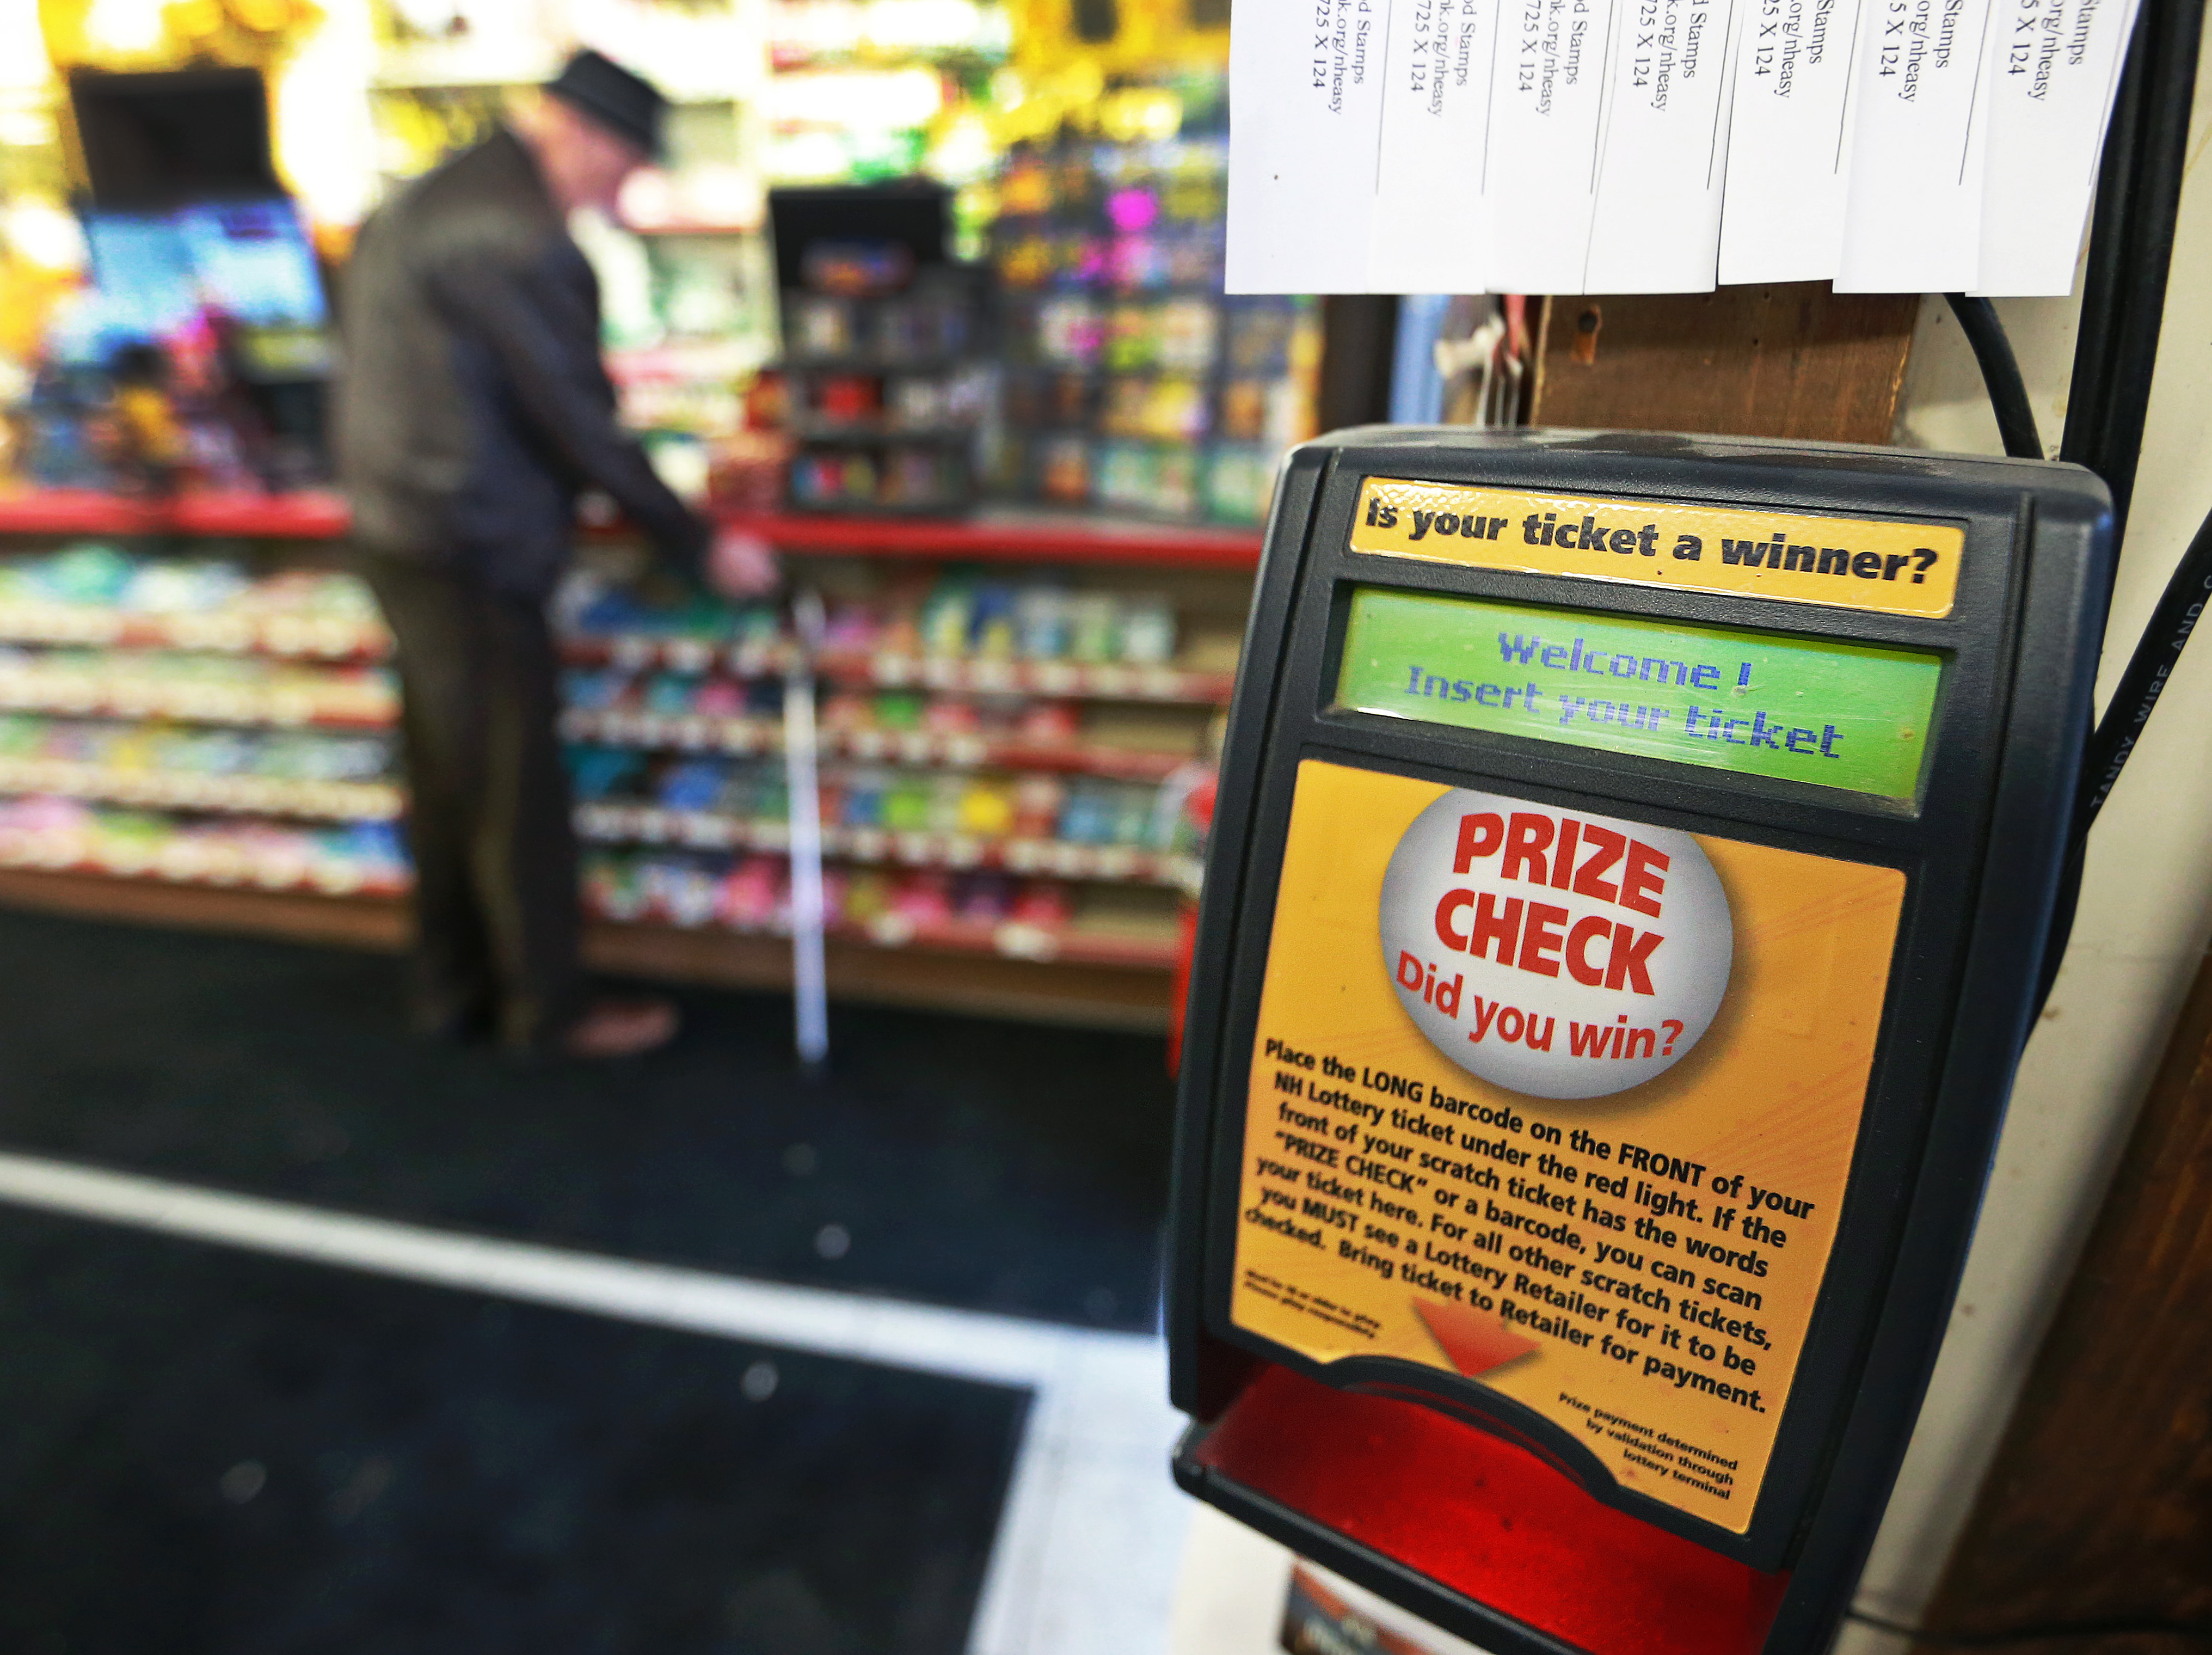 A ticket checking machine is pictured inside Reeds Ferry Market in Merrimack, NH, where a winning ticket in a $560 million Powerball jackpot was sold, on Jan. 8, 2018 (Boston Globe&mdash;Boston Globe via Getty Images)